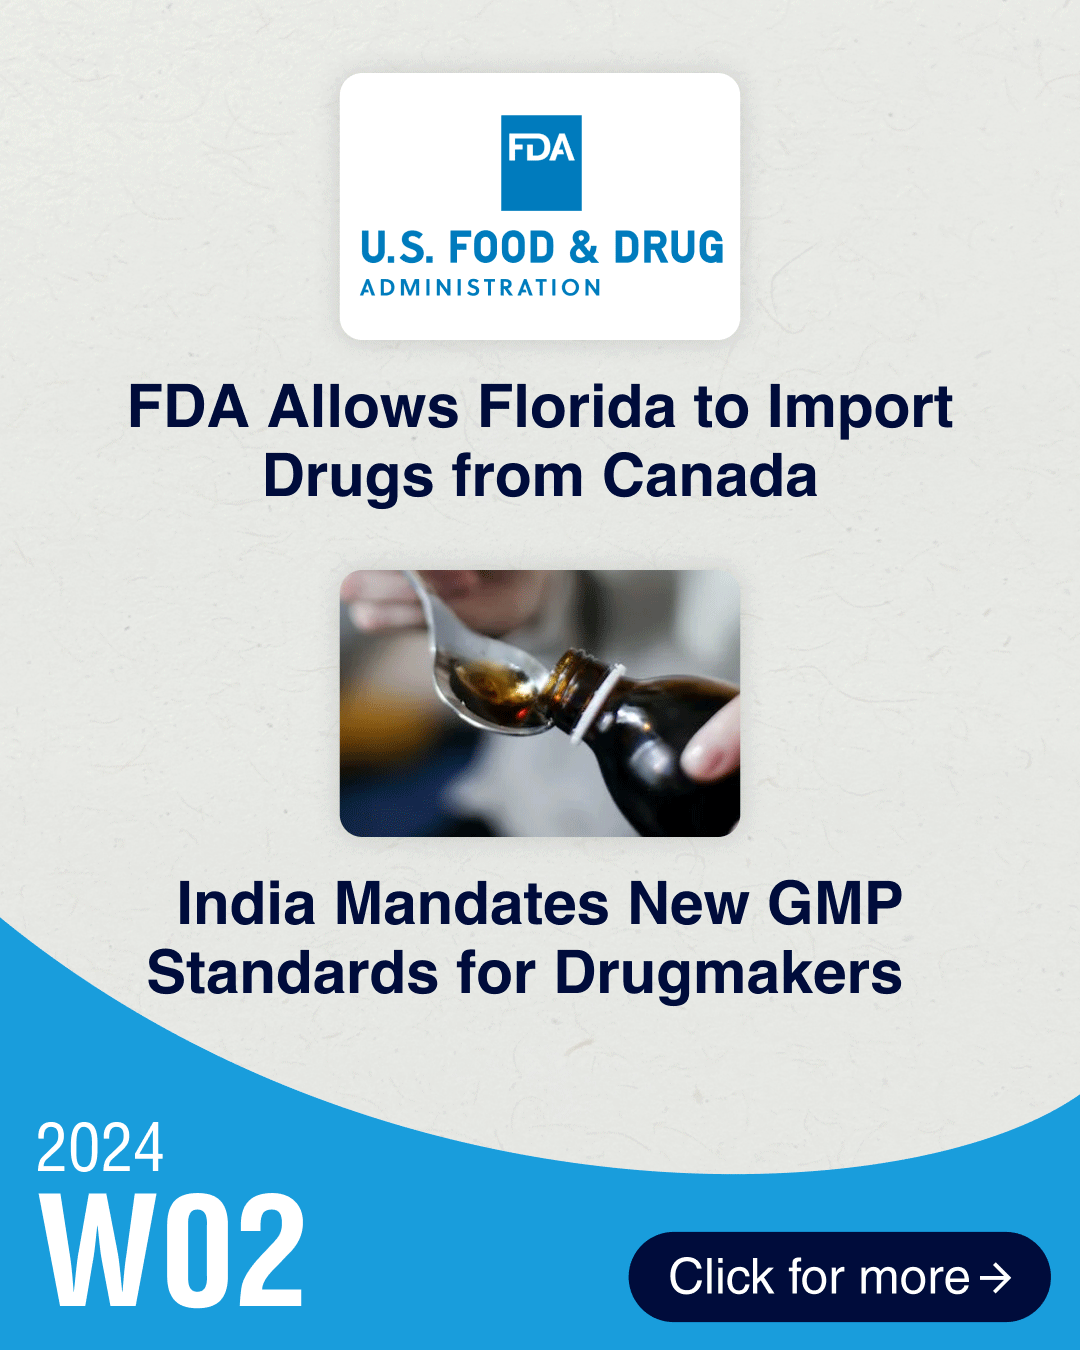 FDA allows Florida to import drugs from Canada; India mandates new GMP standards for drugmakers